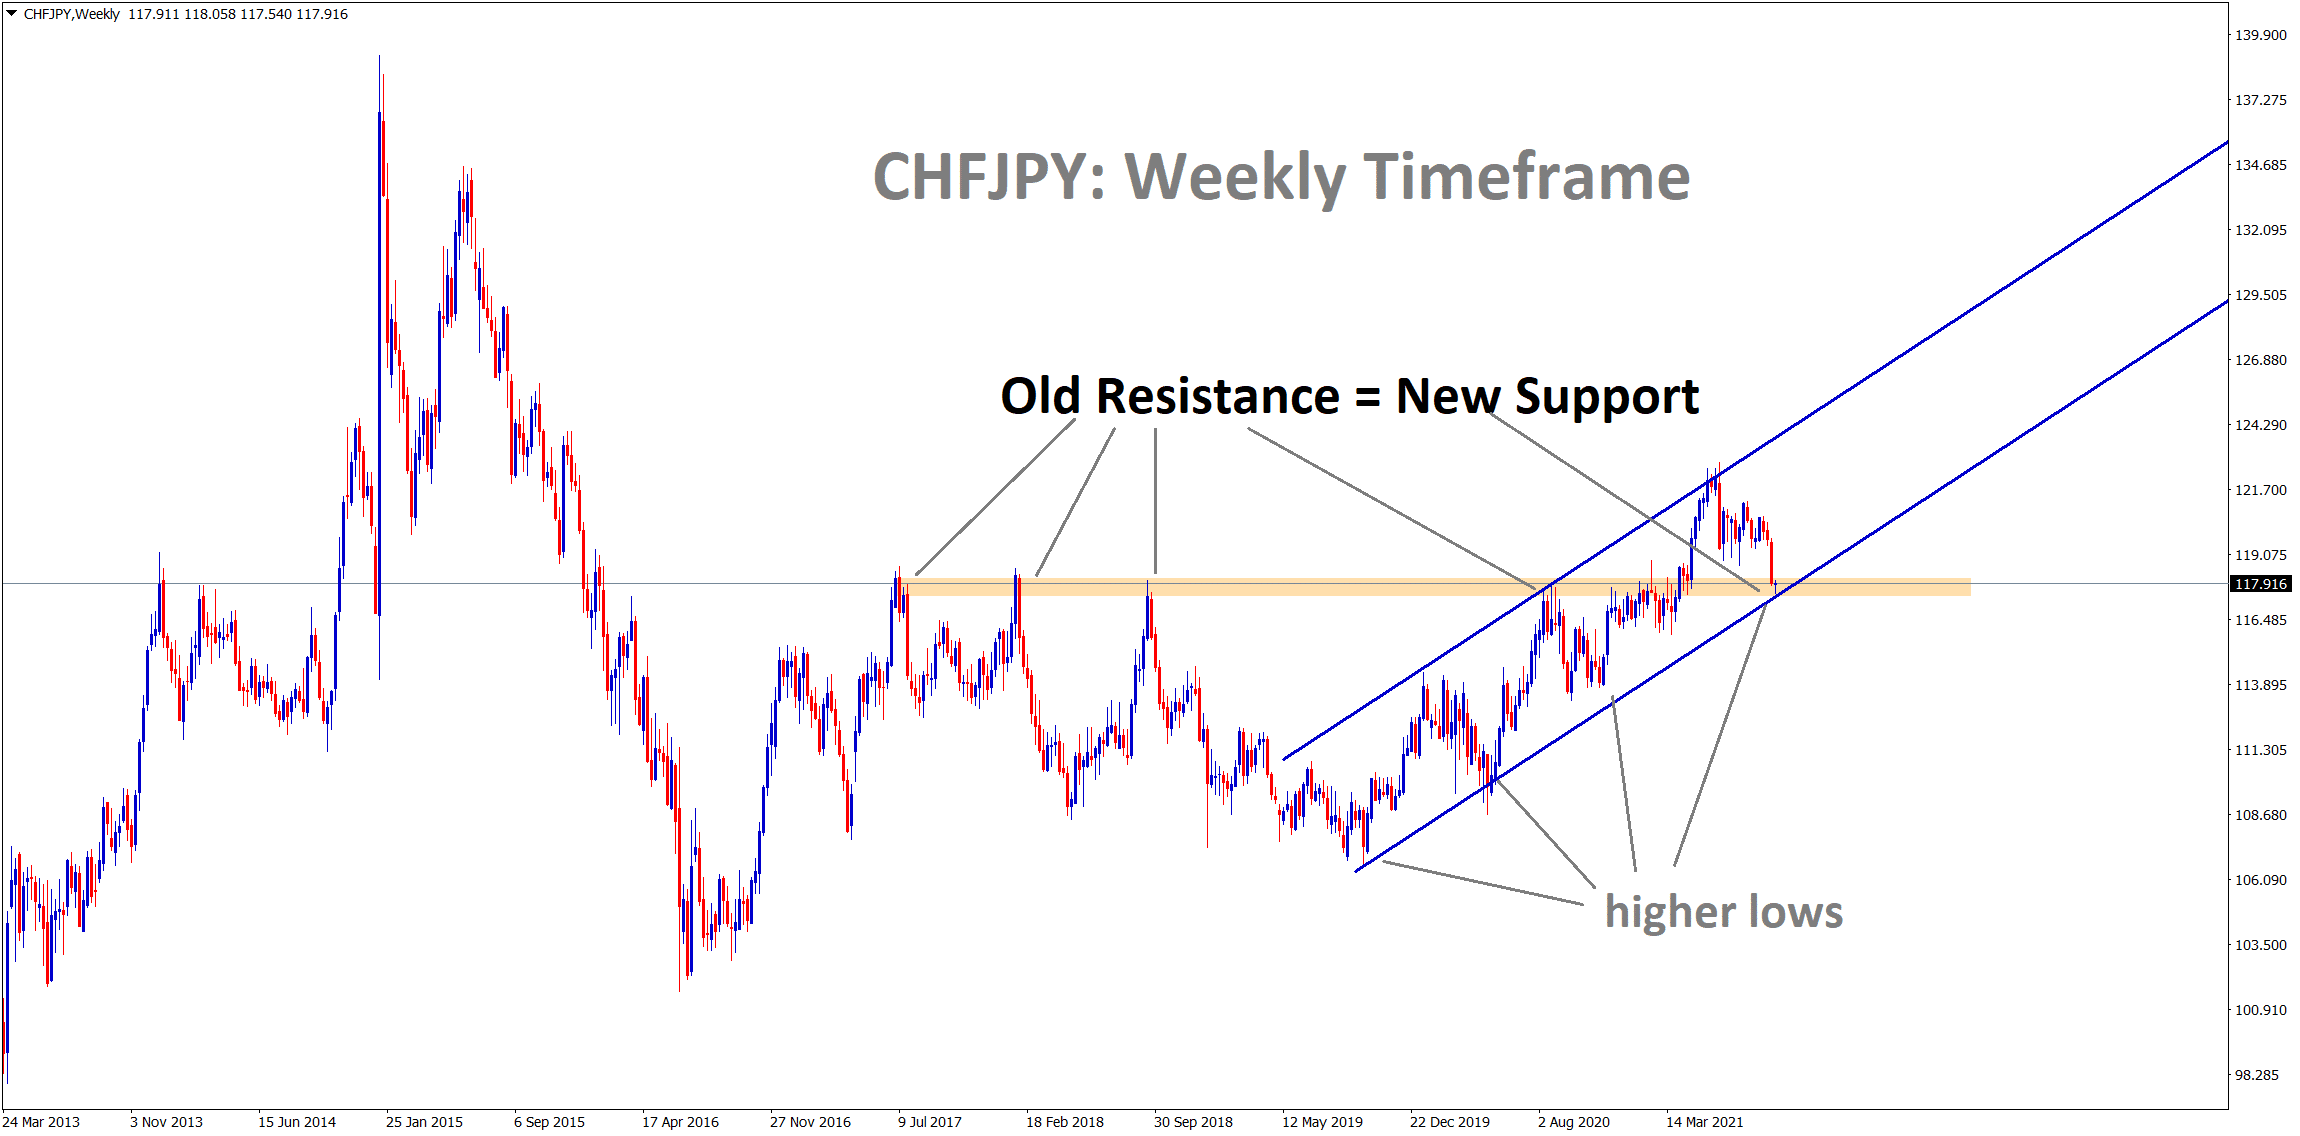 CHFJPY hits the previous strong resistance which may become a new support soon.